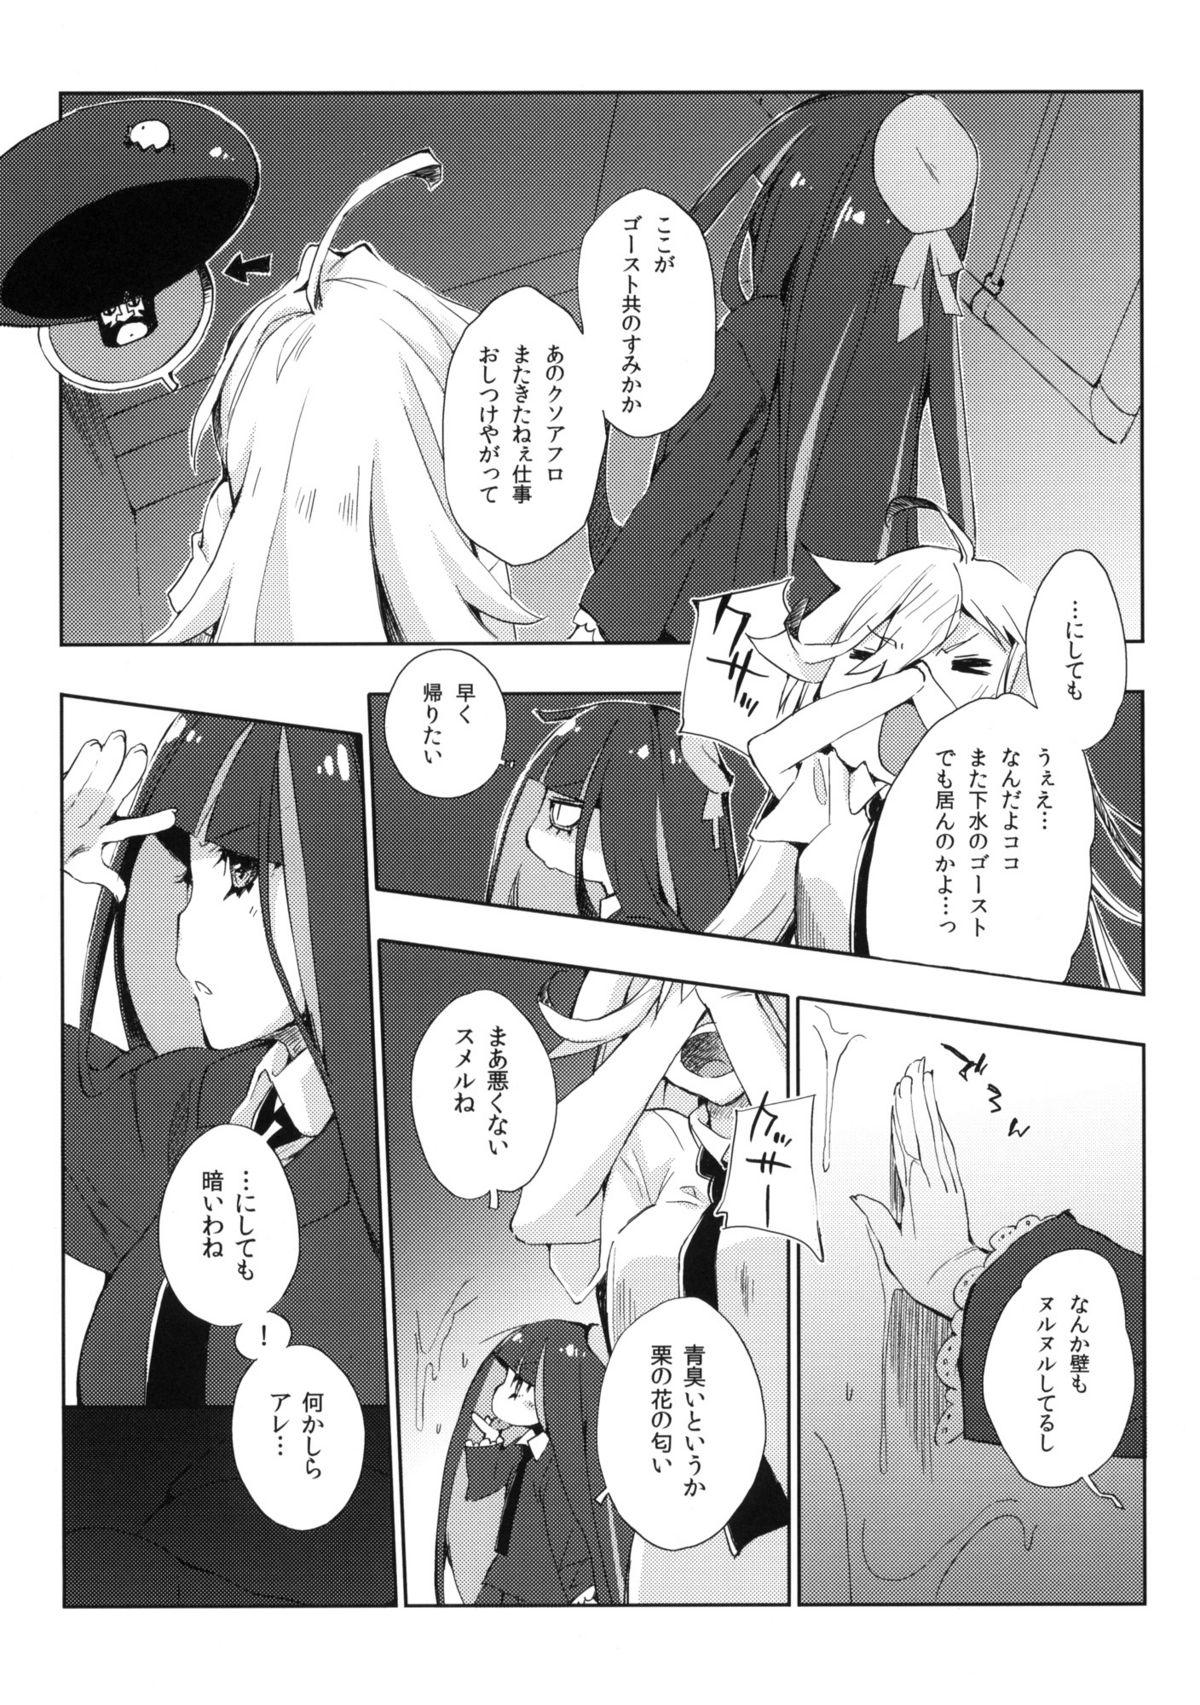 European ¿inmoral unmoral? - Panty and stocking with garterbelt Blow Jobs - Page 4